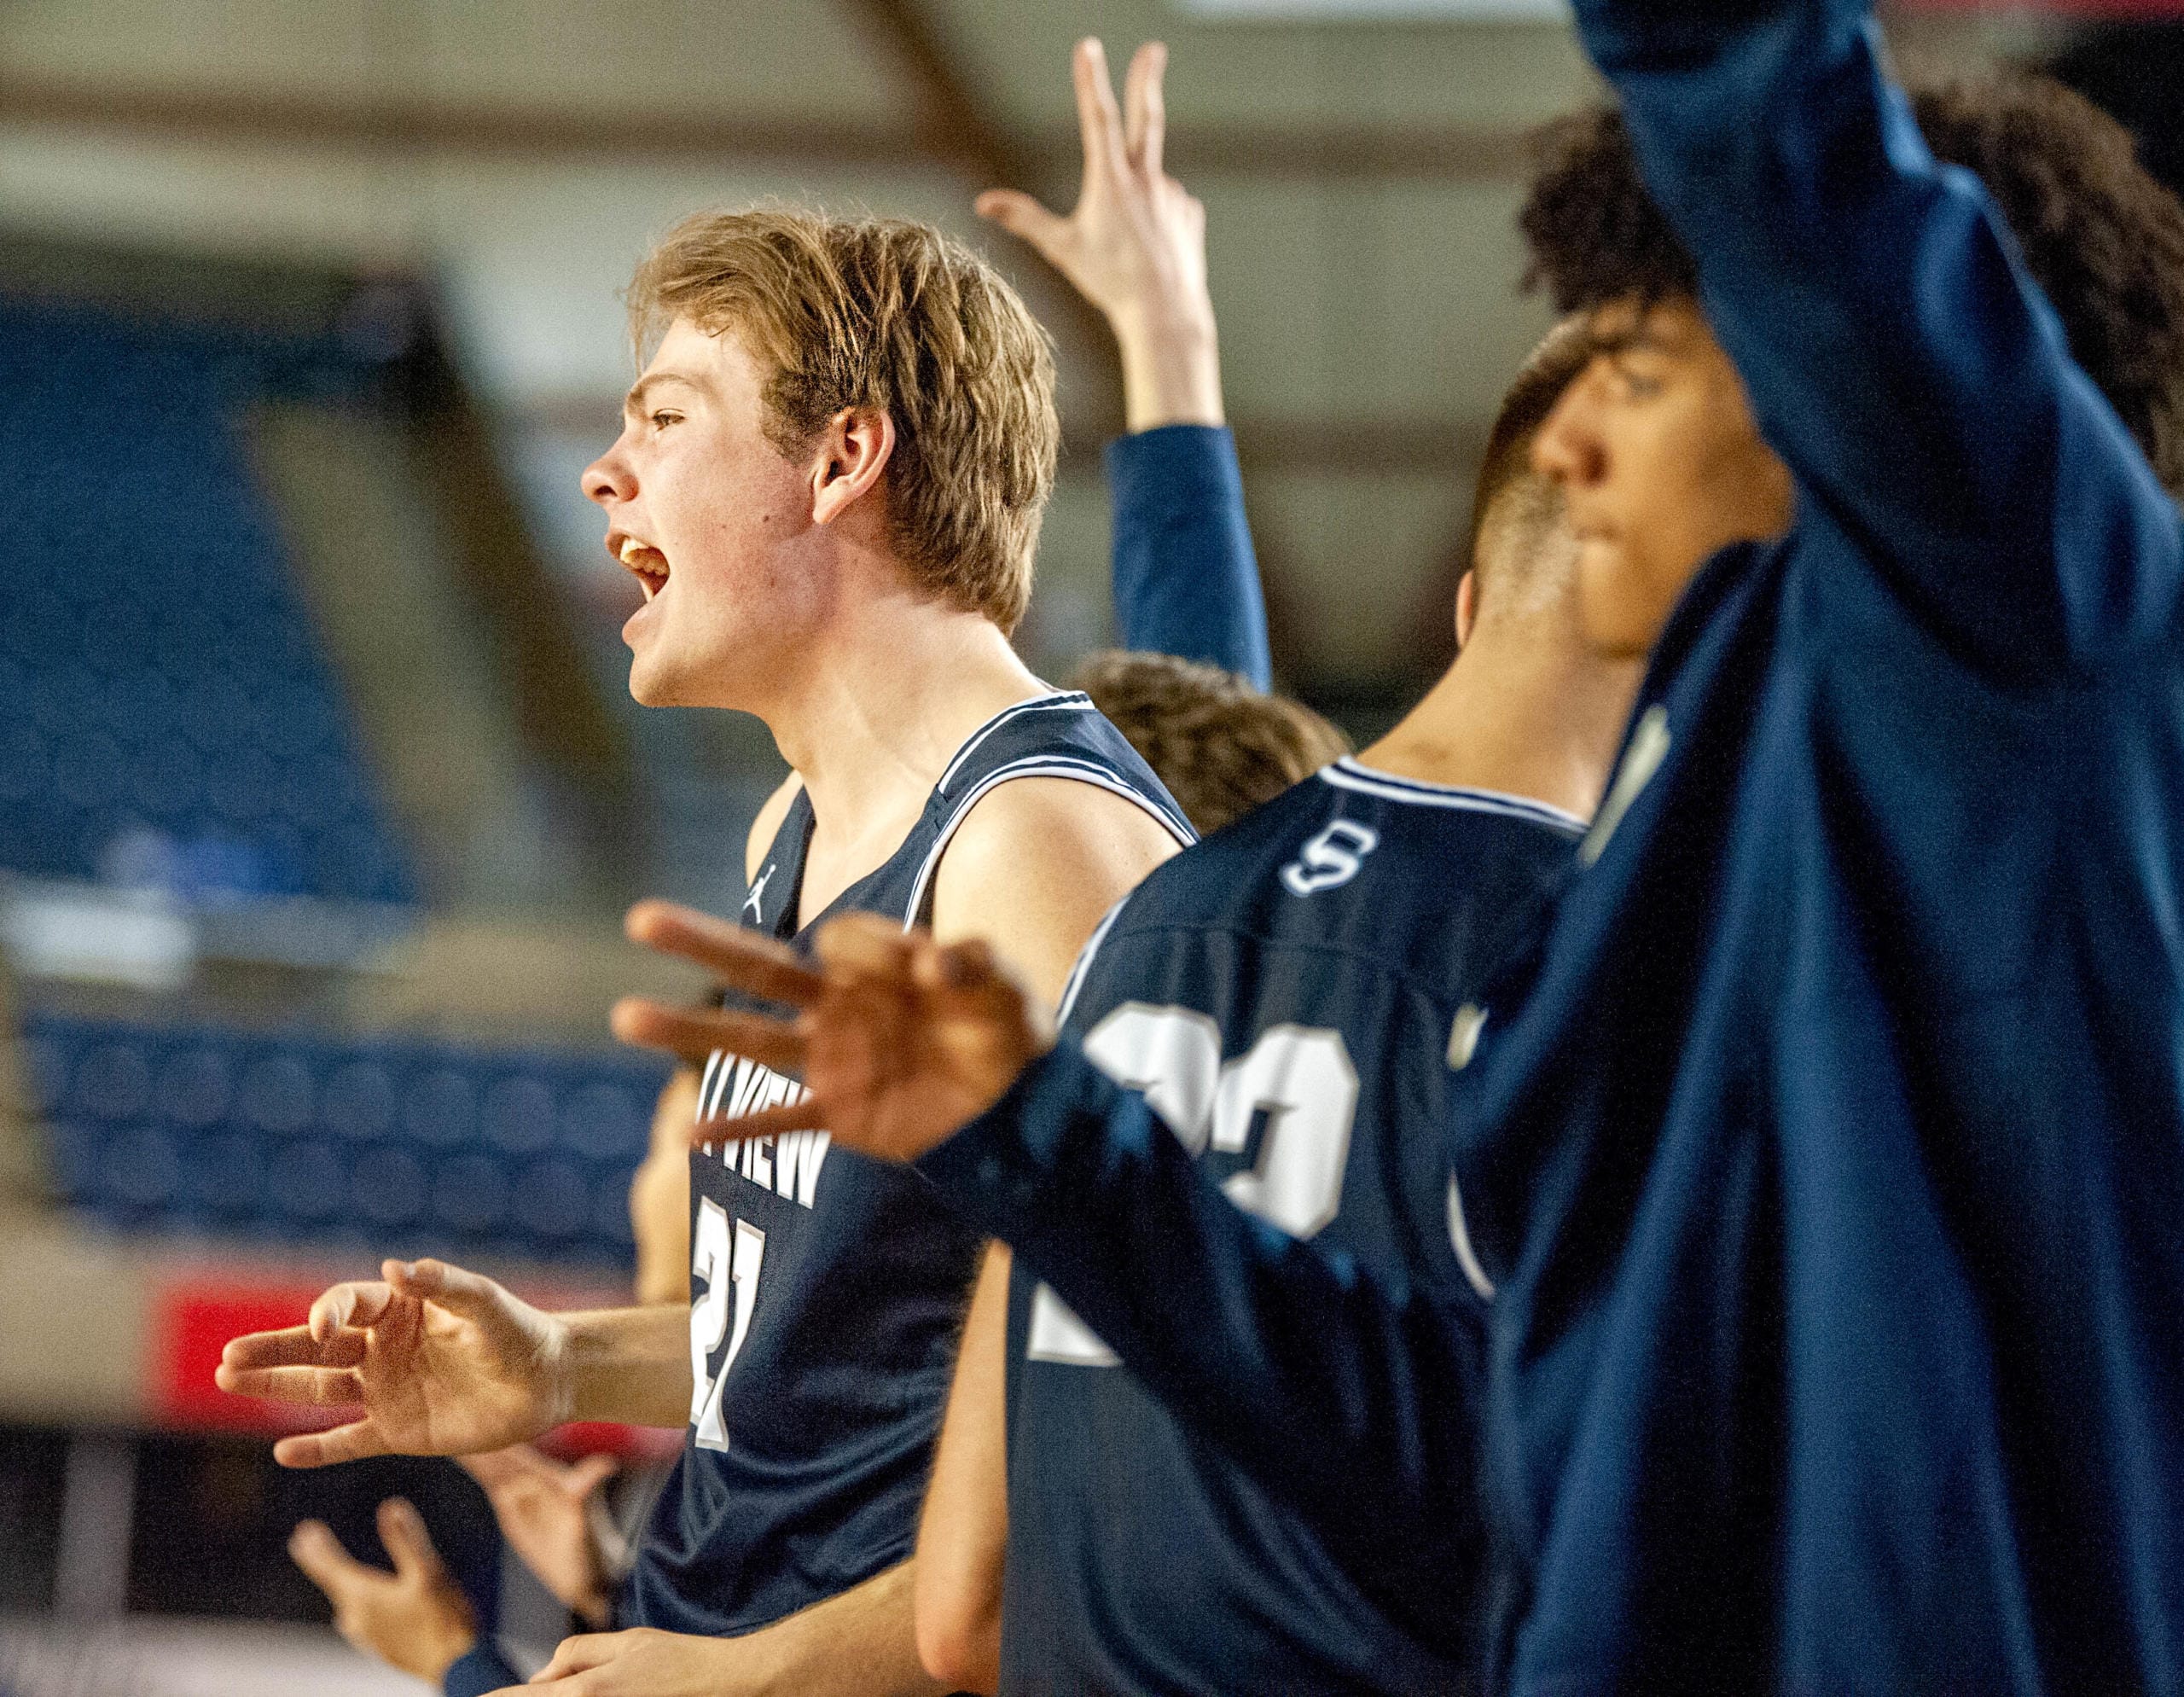 Skyview's Cole Bain, left, celebrates a Jace Chatman 3-pointer with his teammates on the bench during Skyviews' 47-31 victory over West Valley of Yakima in a 4A round-of-12 game Wednesday at the Tacoma Dome.